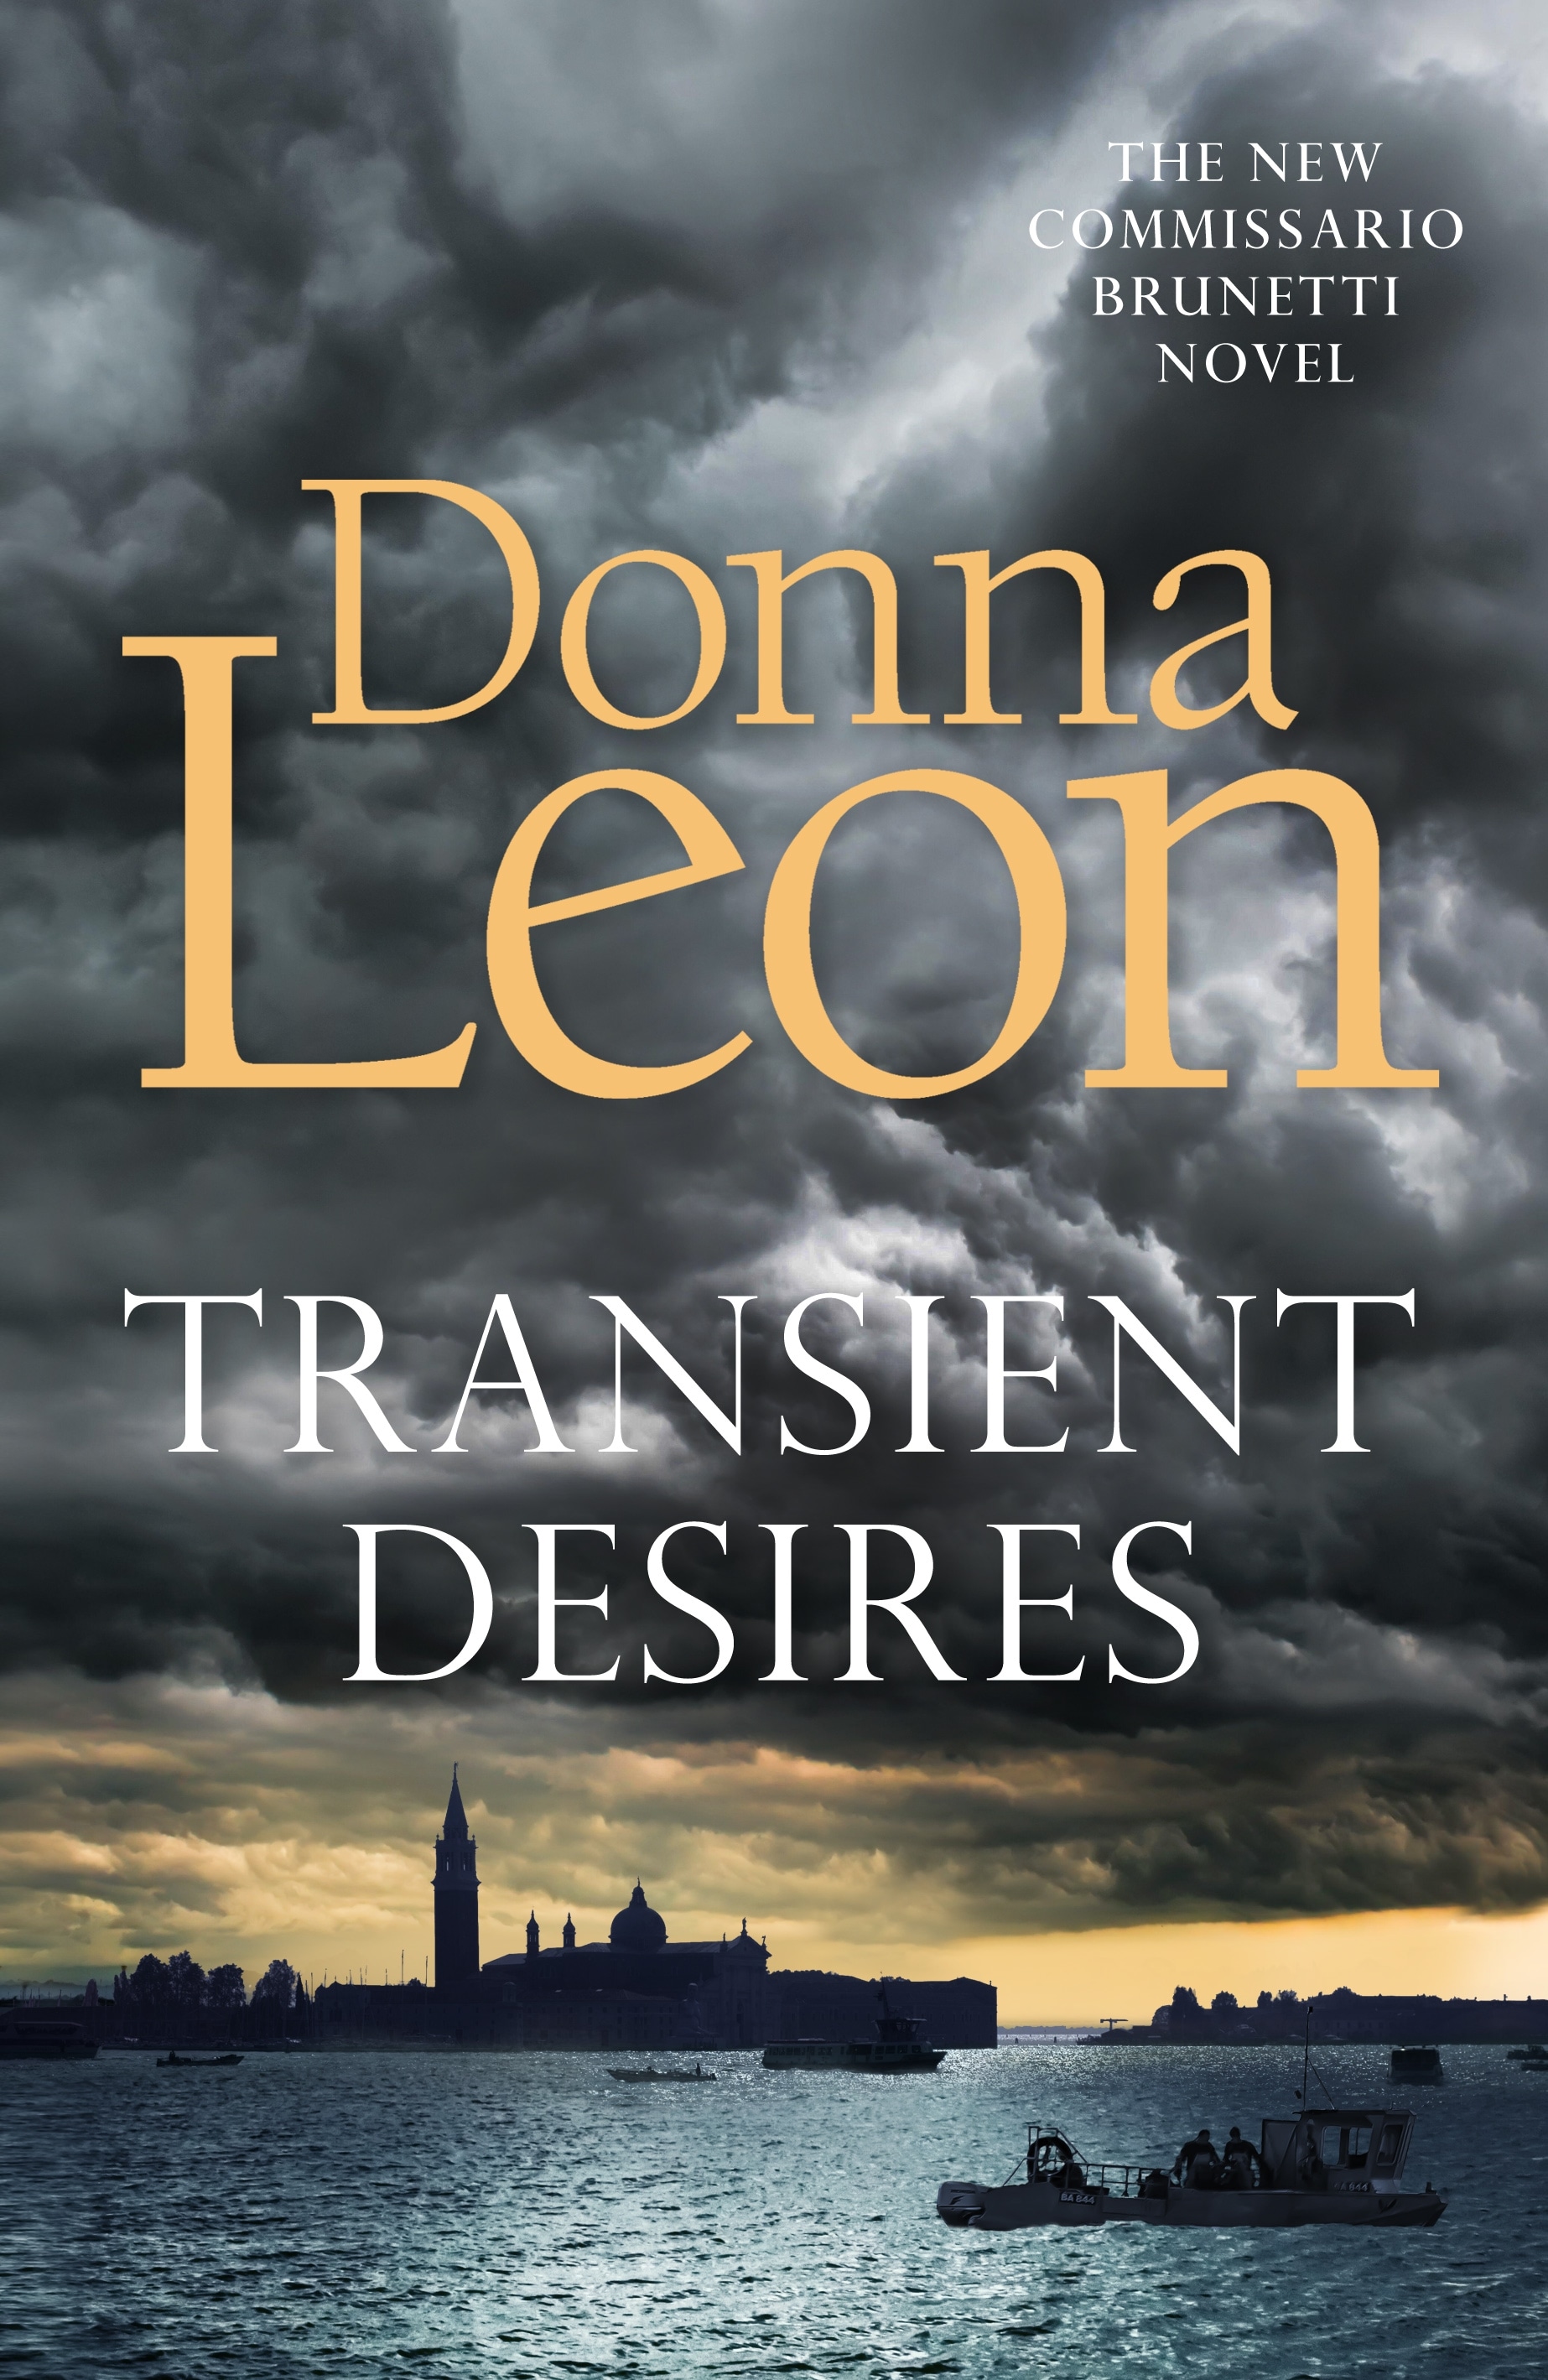 Book “Transient Desires” by Donna Leon — March 4, 2021